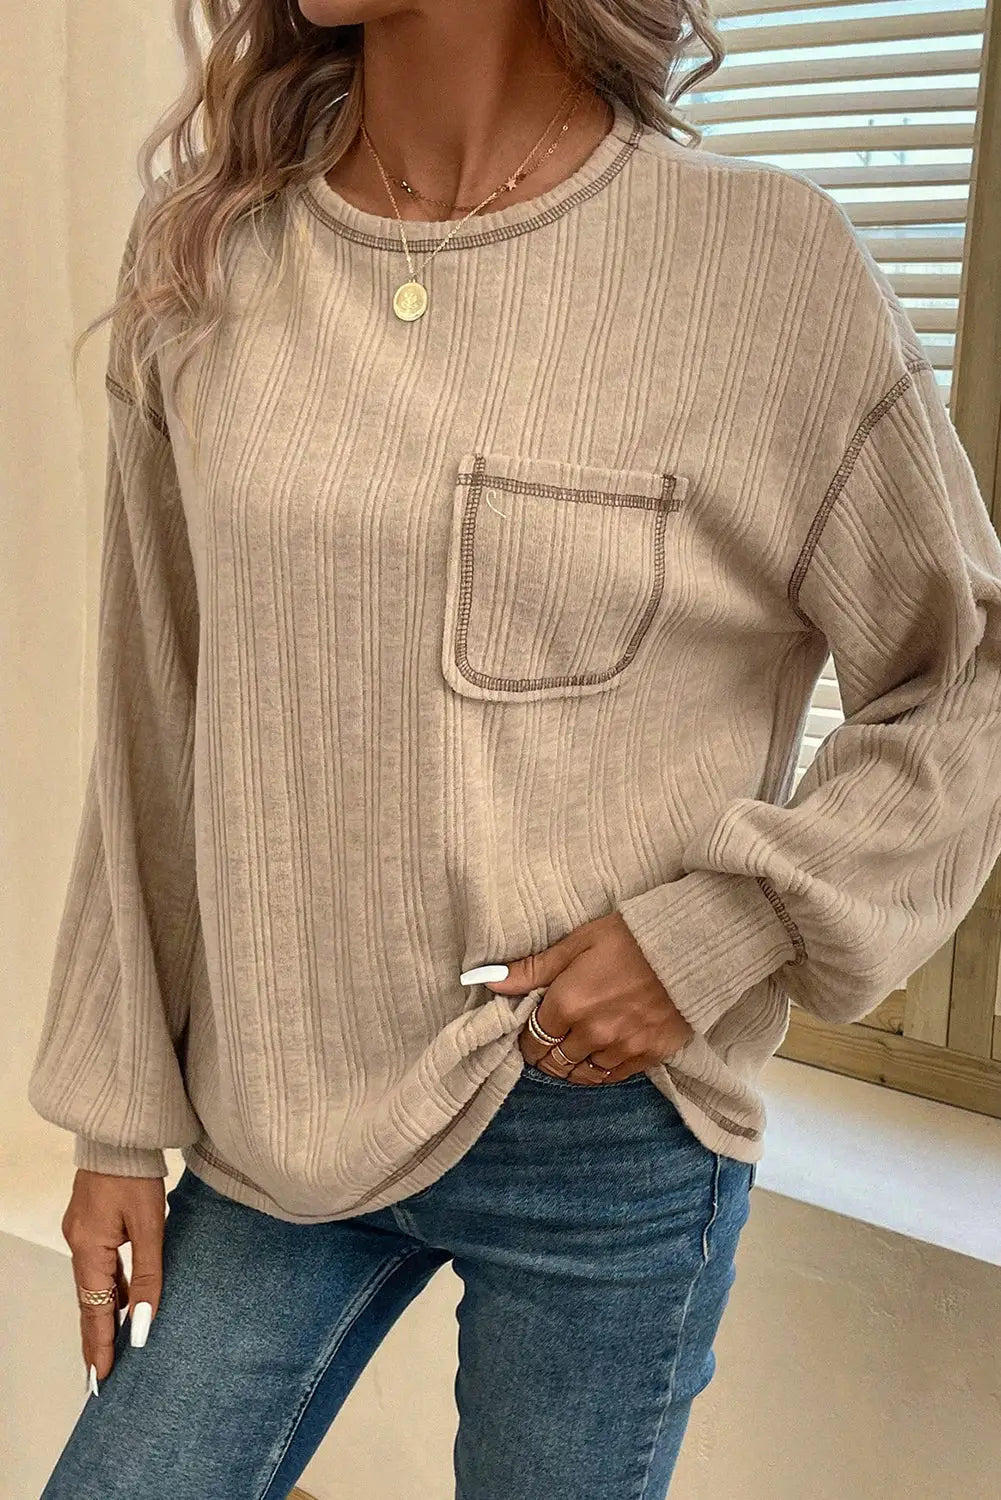 Pale khaki loose exposed stitching textured knit top - l 97% polyester + 3% elastane long sleeve tops